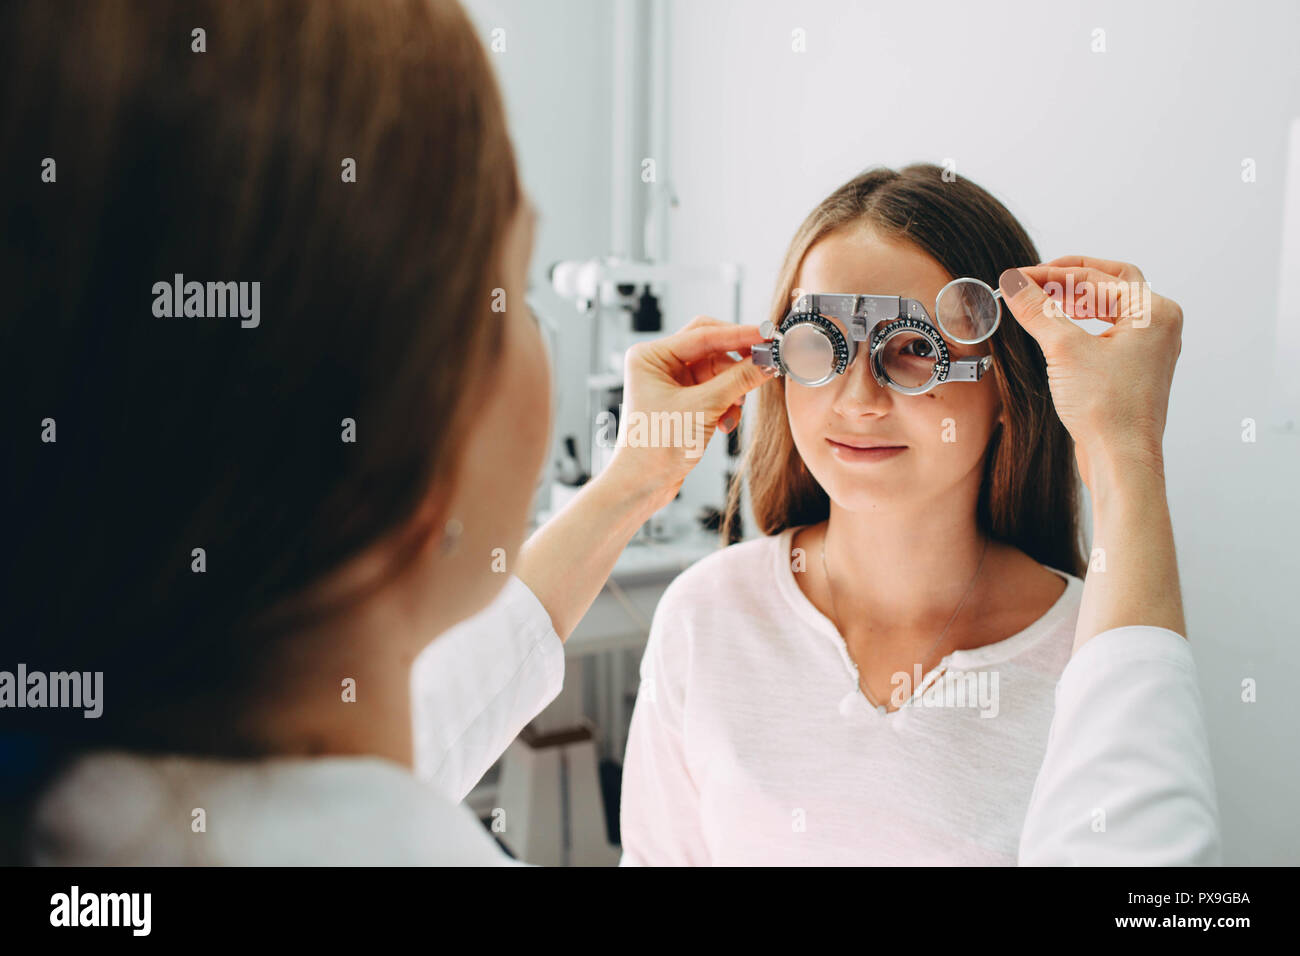 Eye doctor examining girls vision using a trial frame Stock Photo